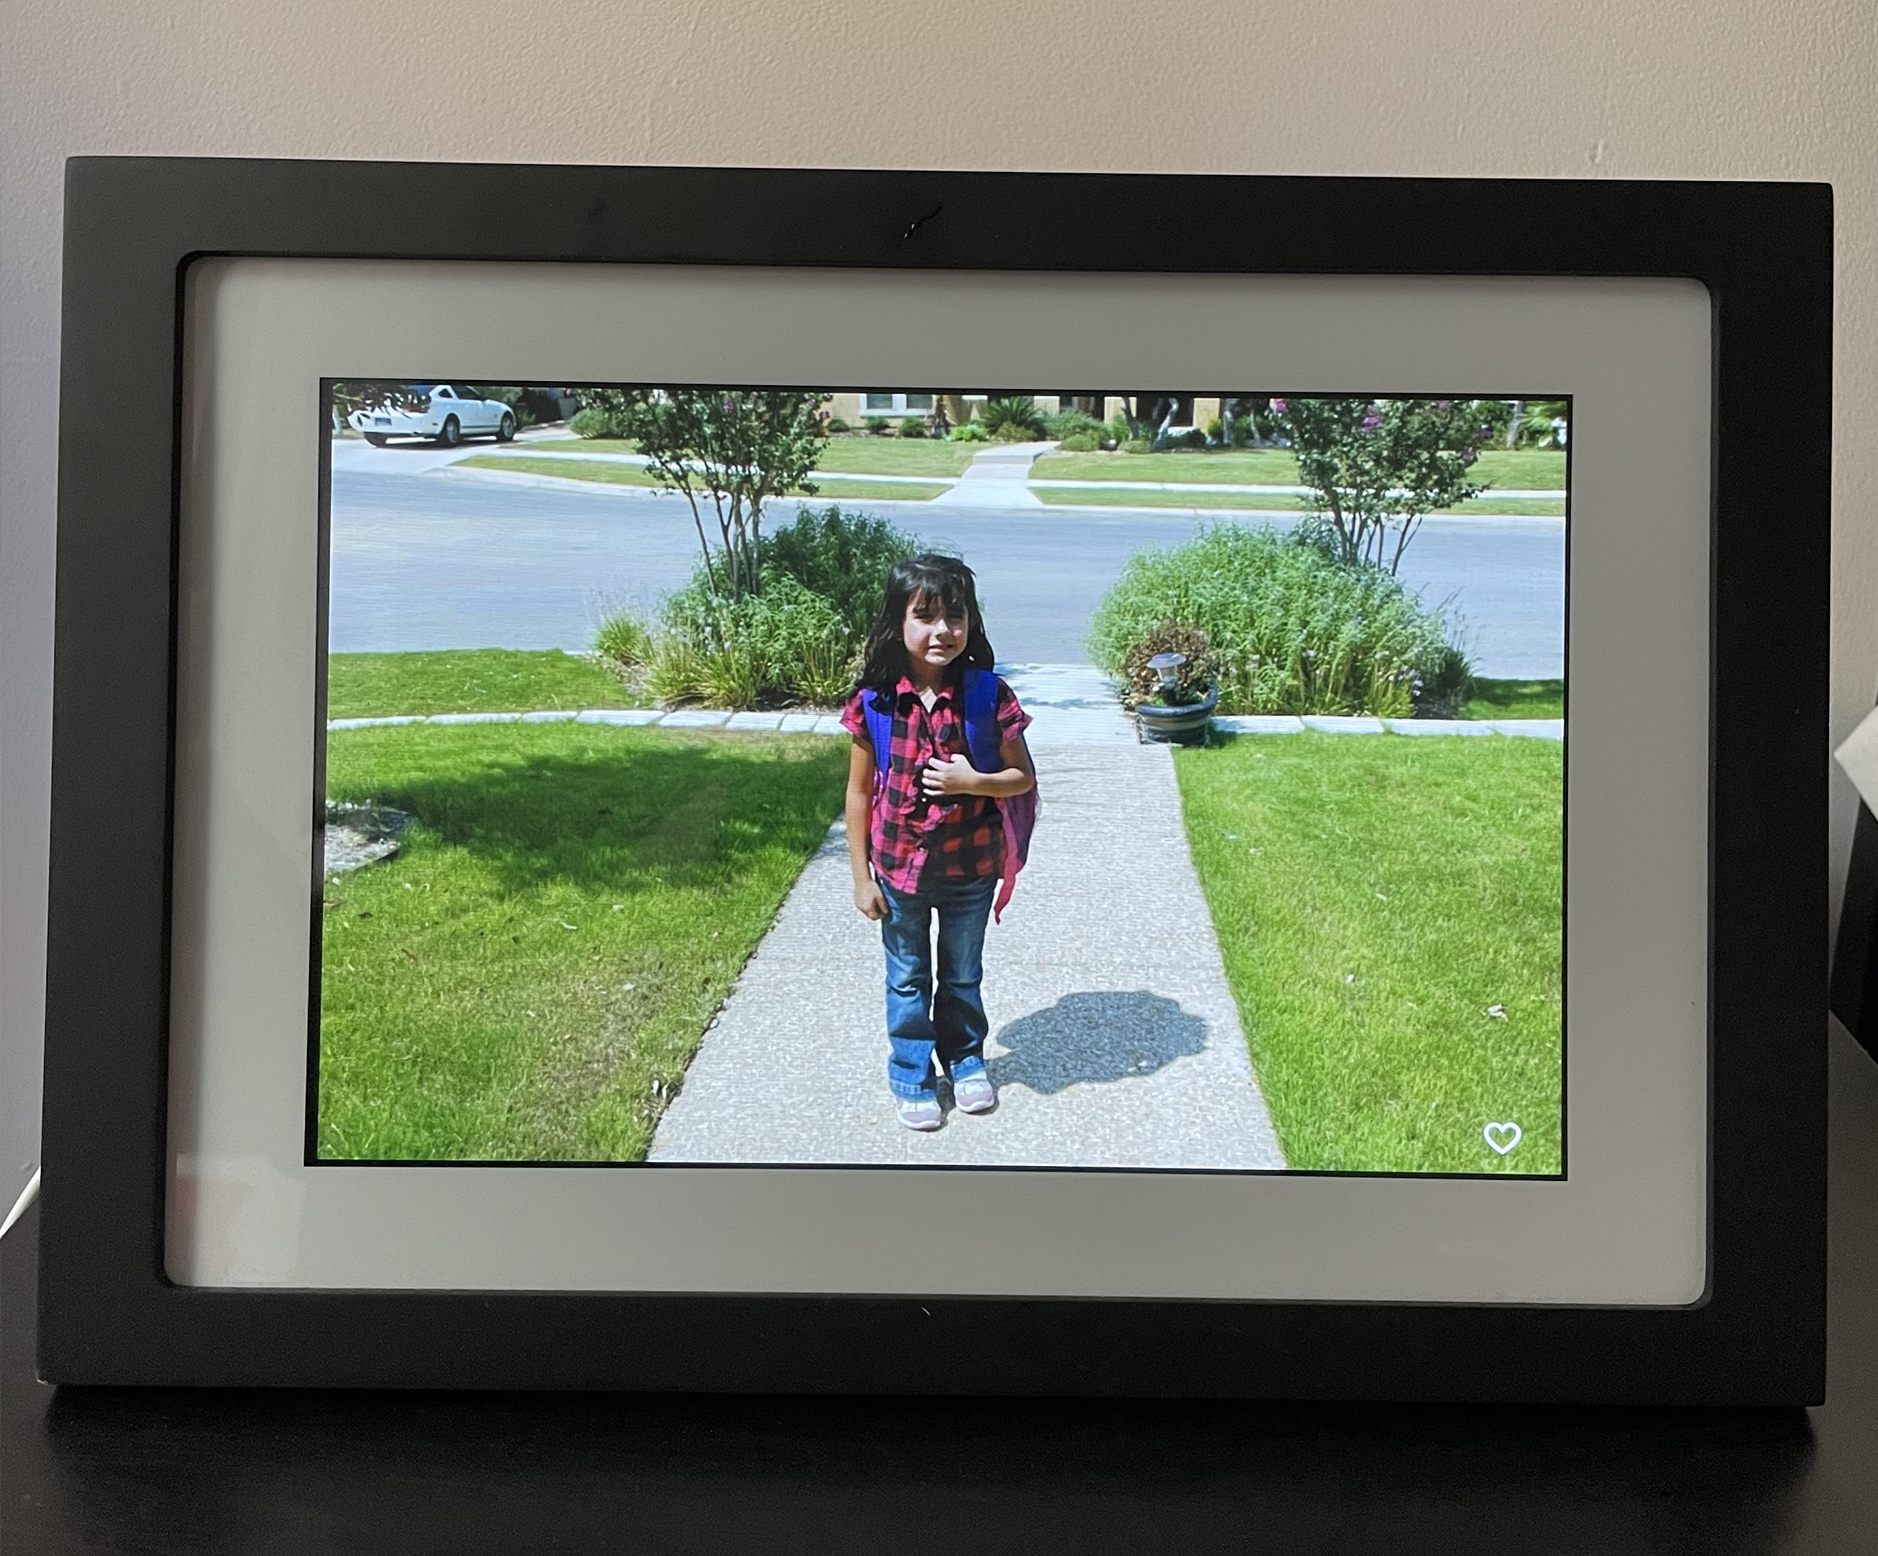 Hurry! This Digital Photo Frame Sells Out Every Christmas